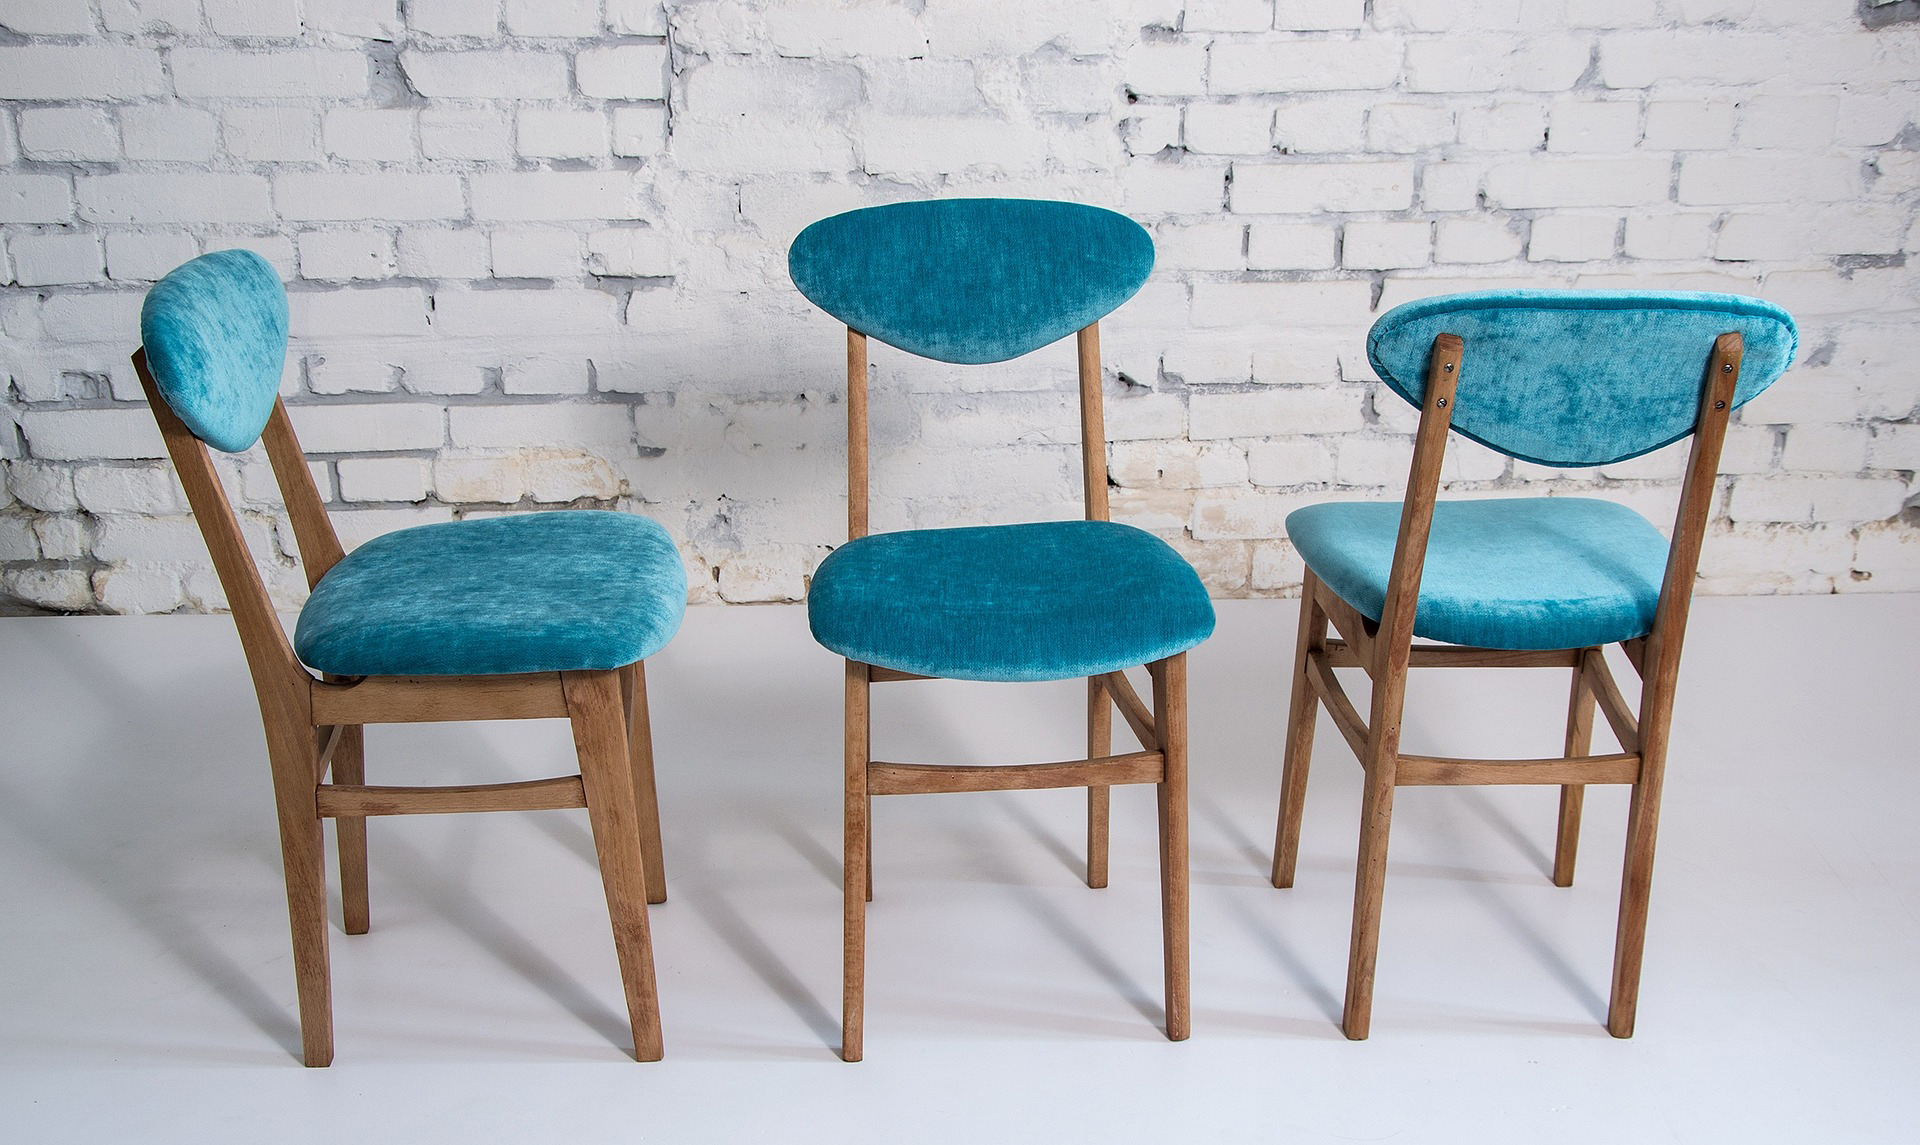 Chairs with upholstery